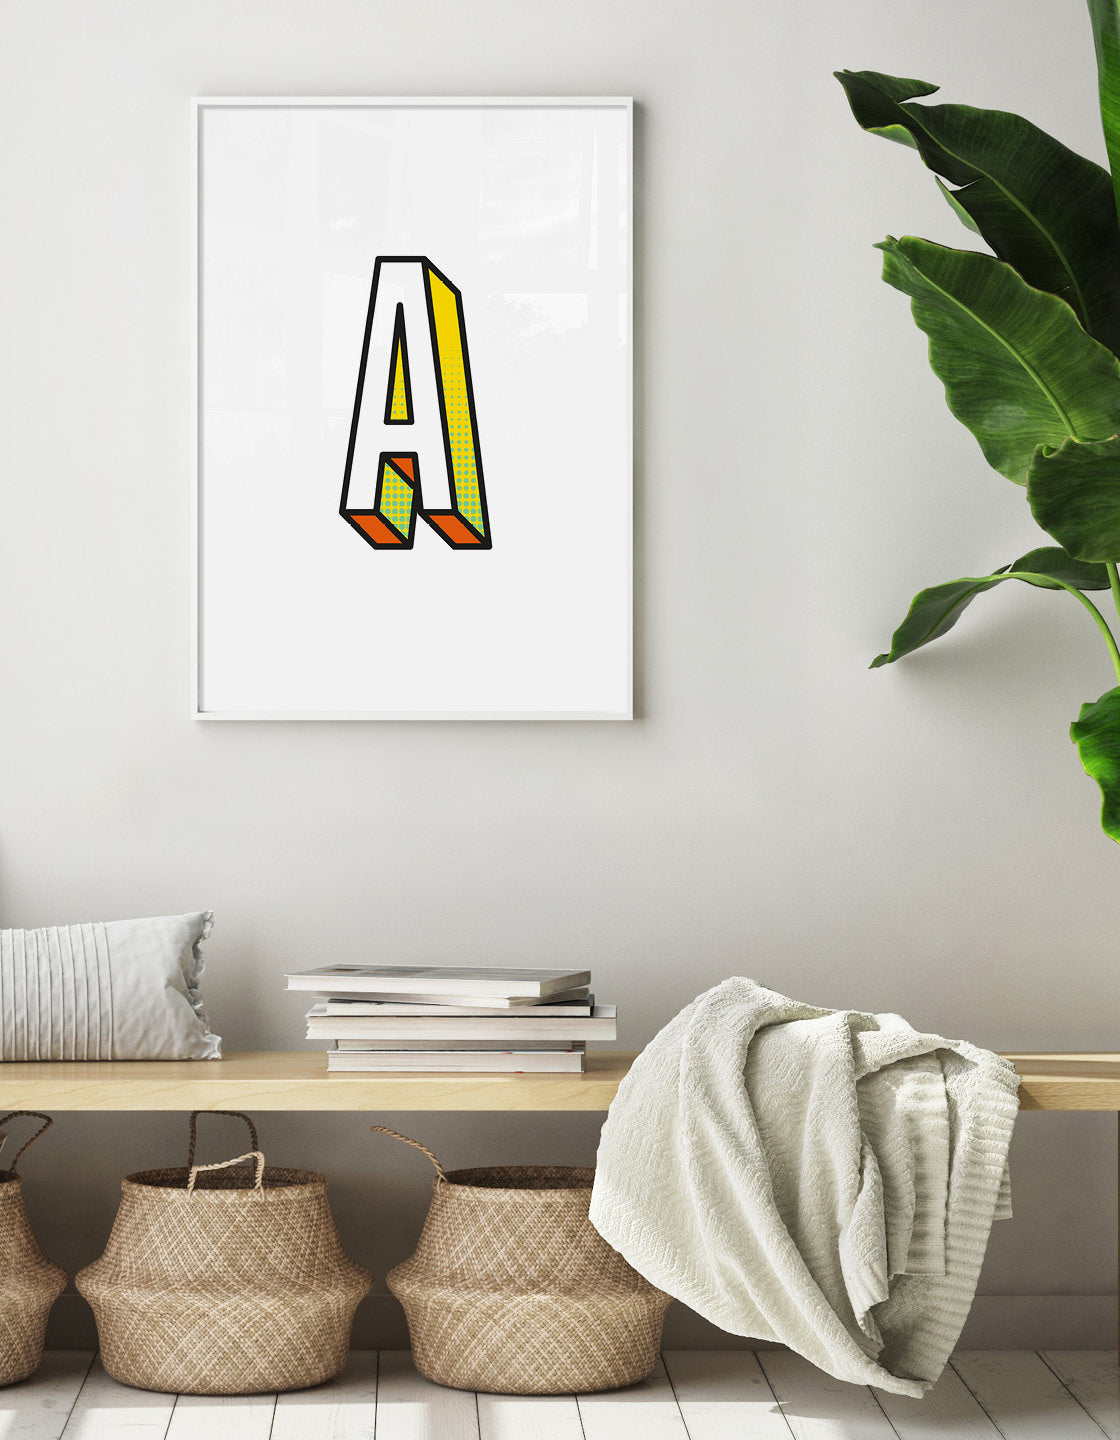 Letter A initial 3D print shown on a neutral colour wall with a wooden bench with seagrass baskets underneath, blankets and books on top and a green plants off to one side